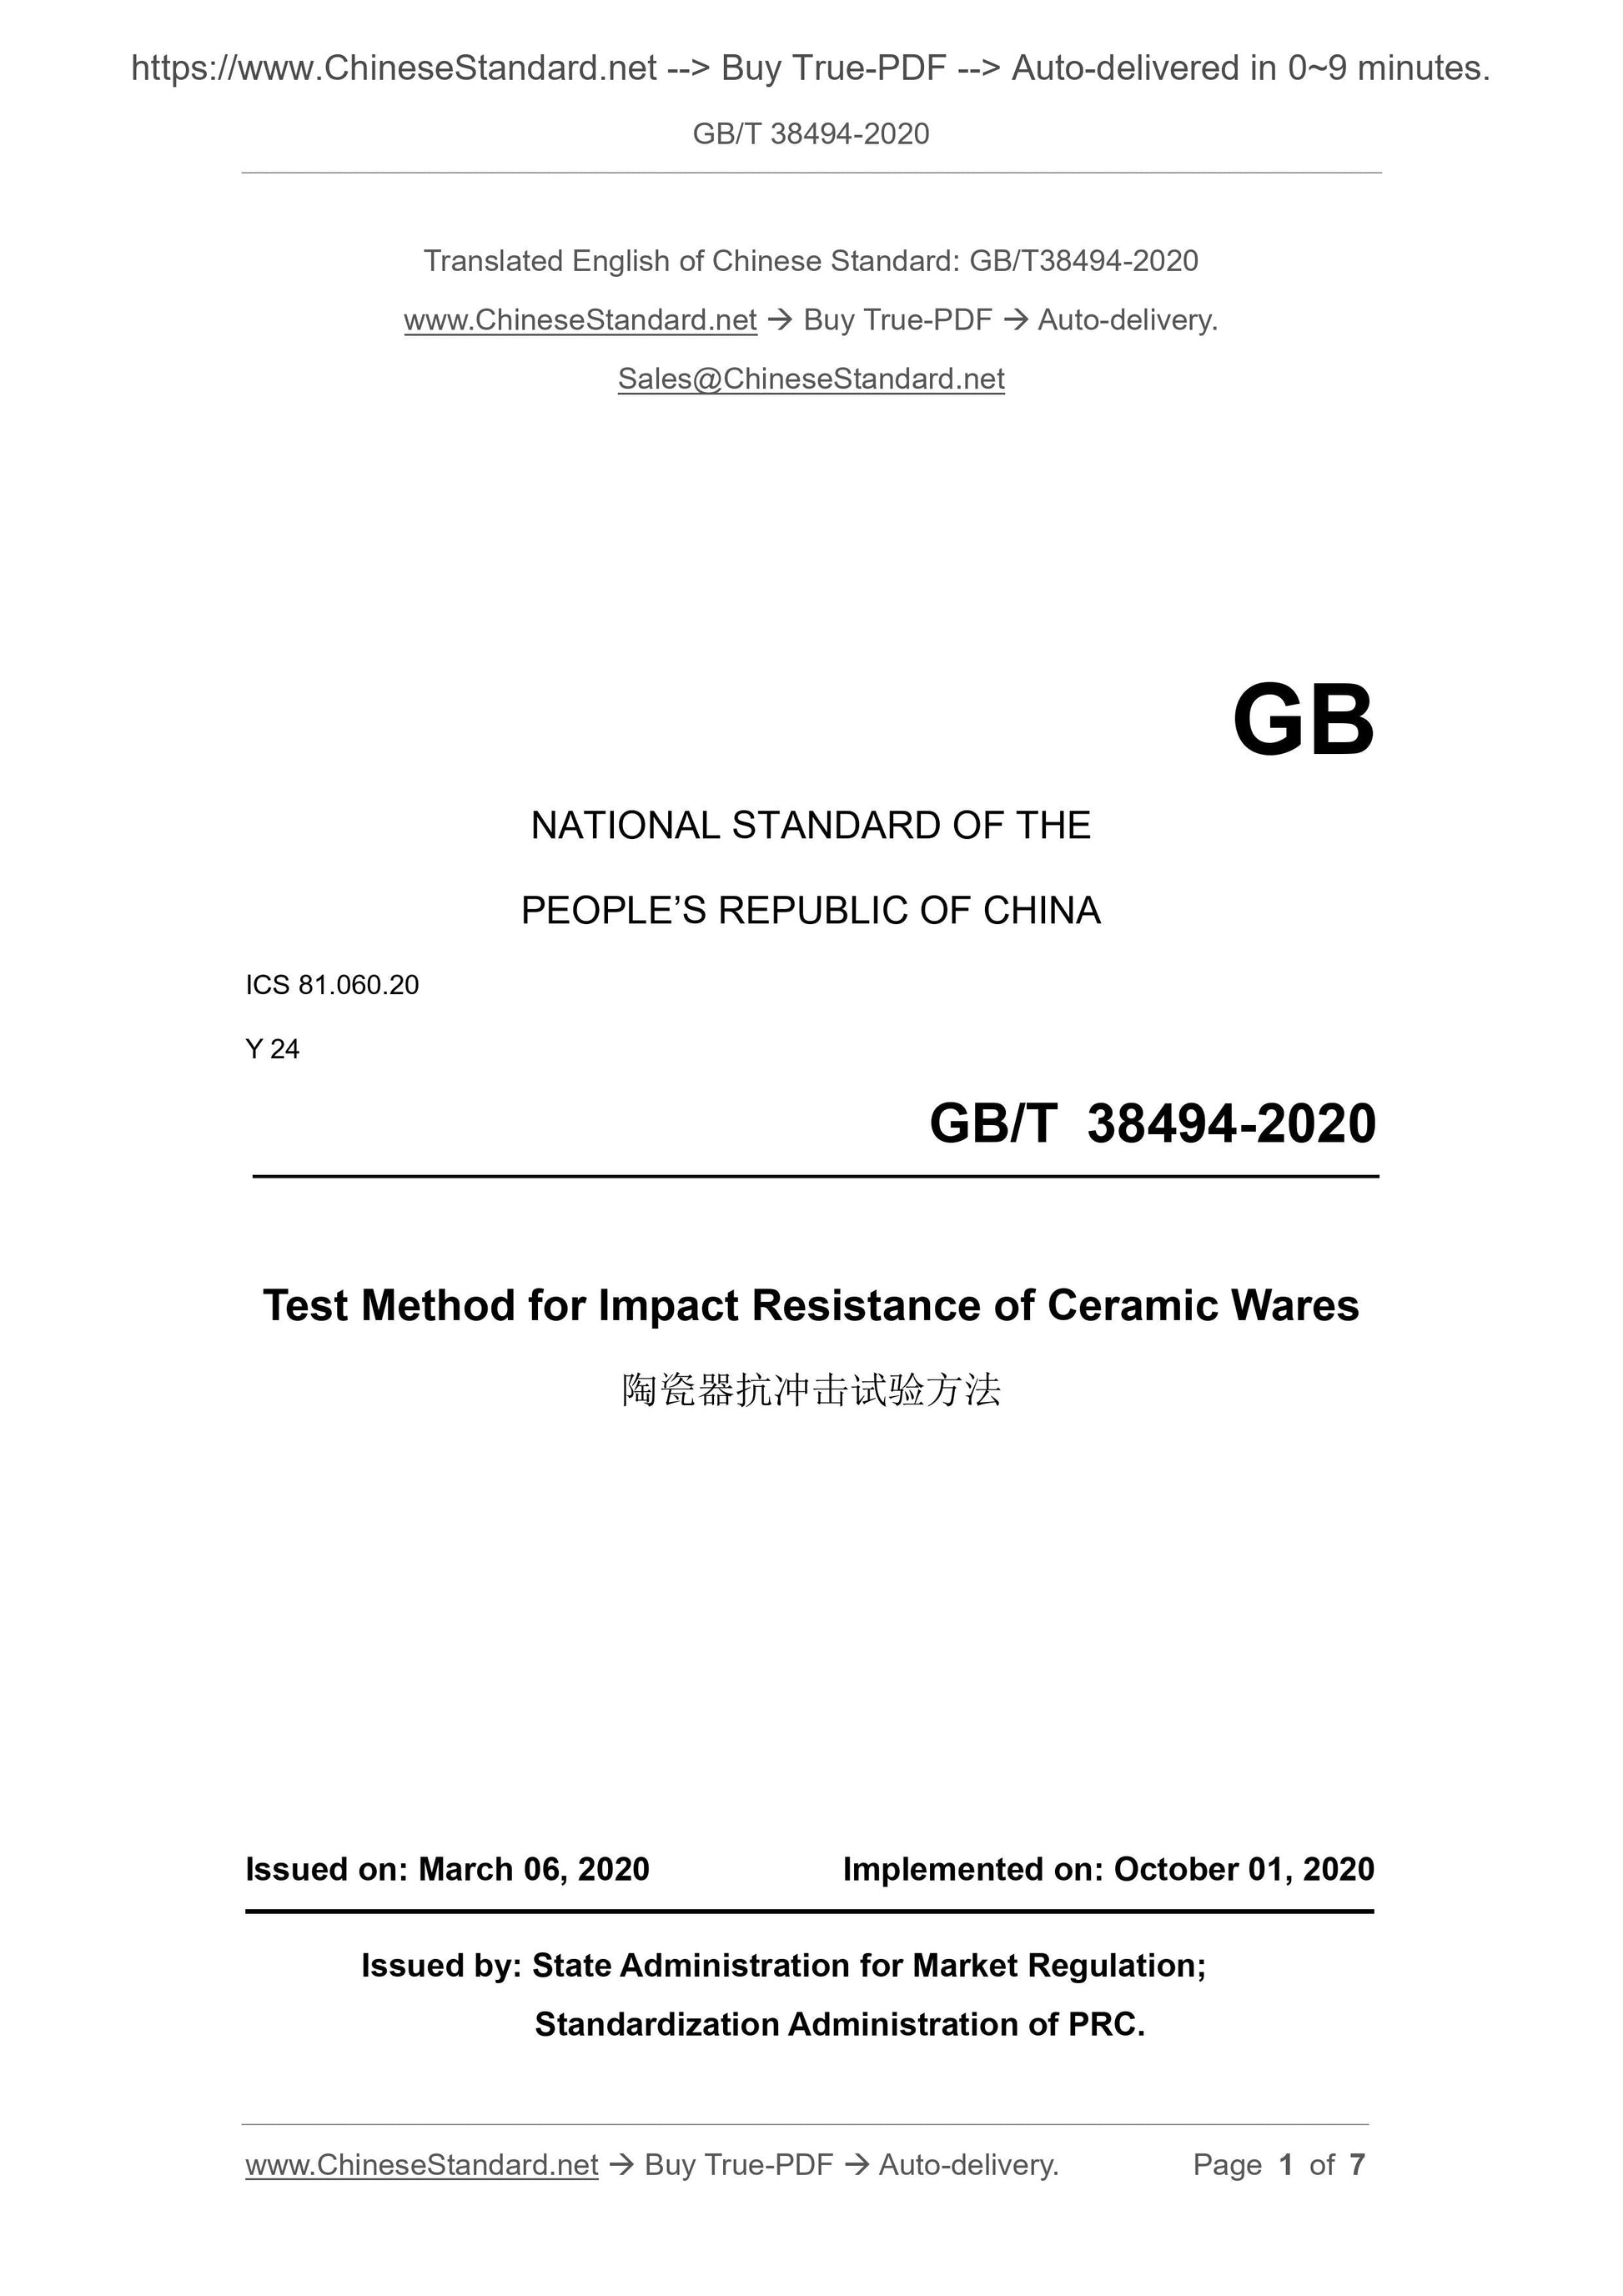 GB/T 38494-2020 Page 1